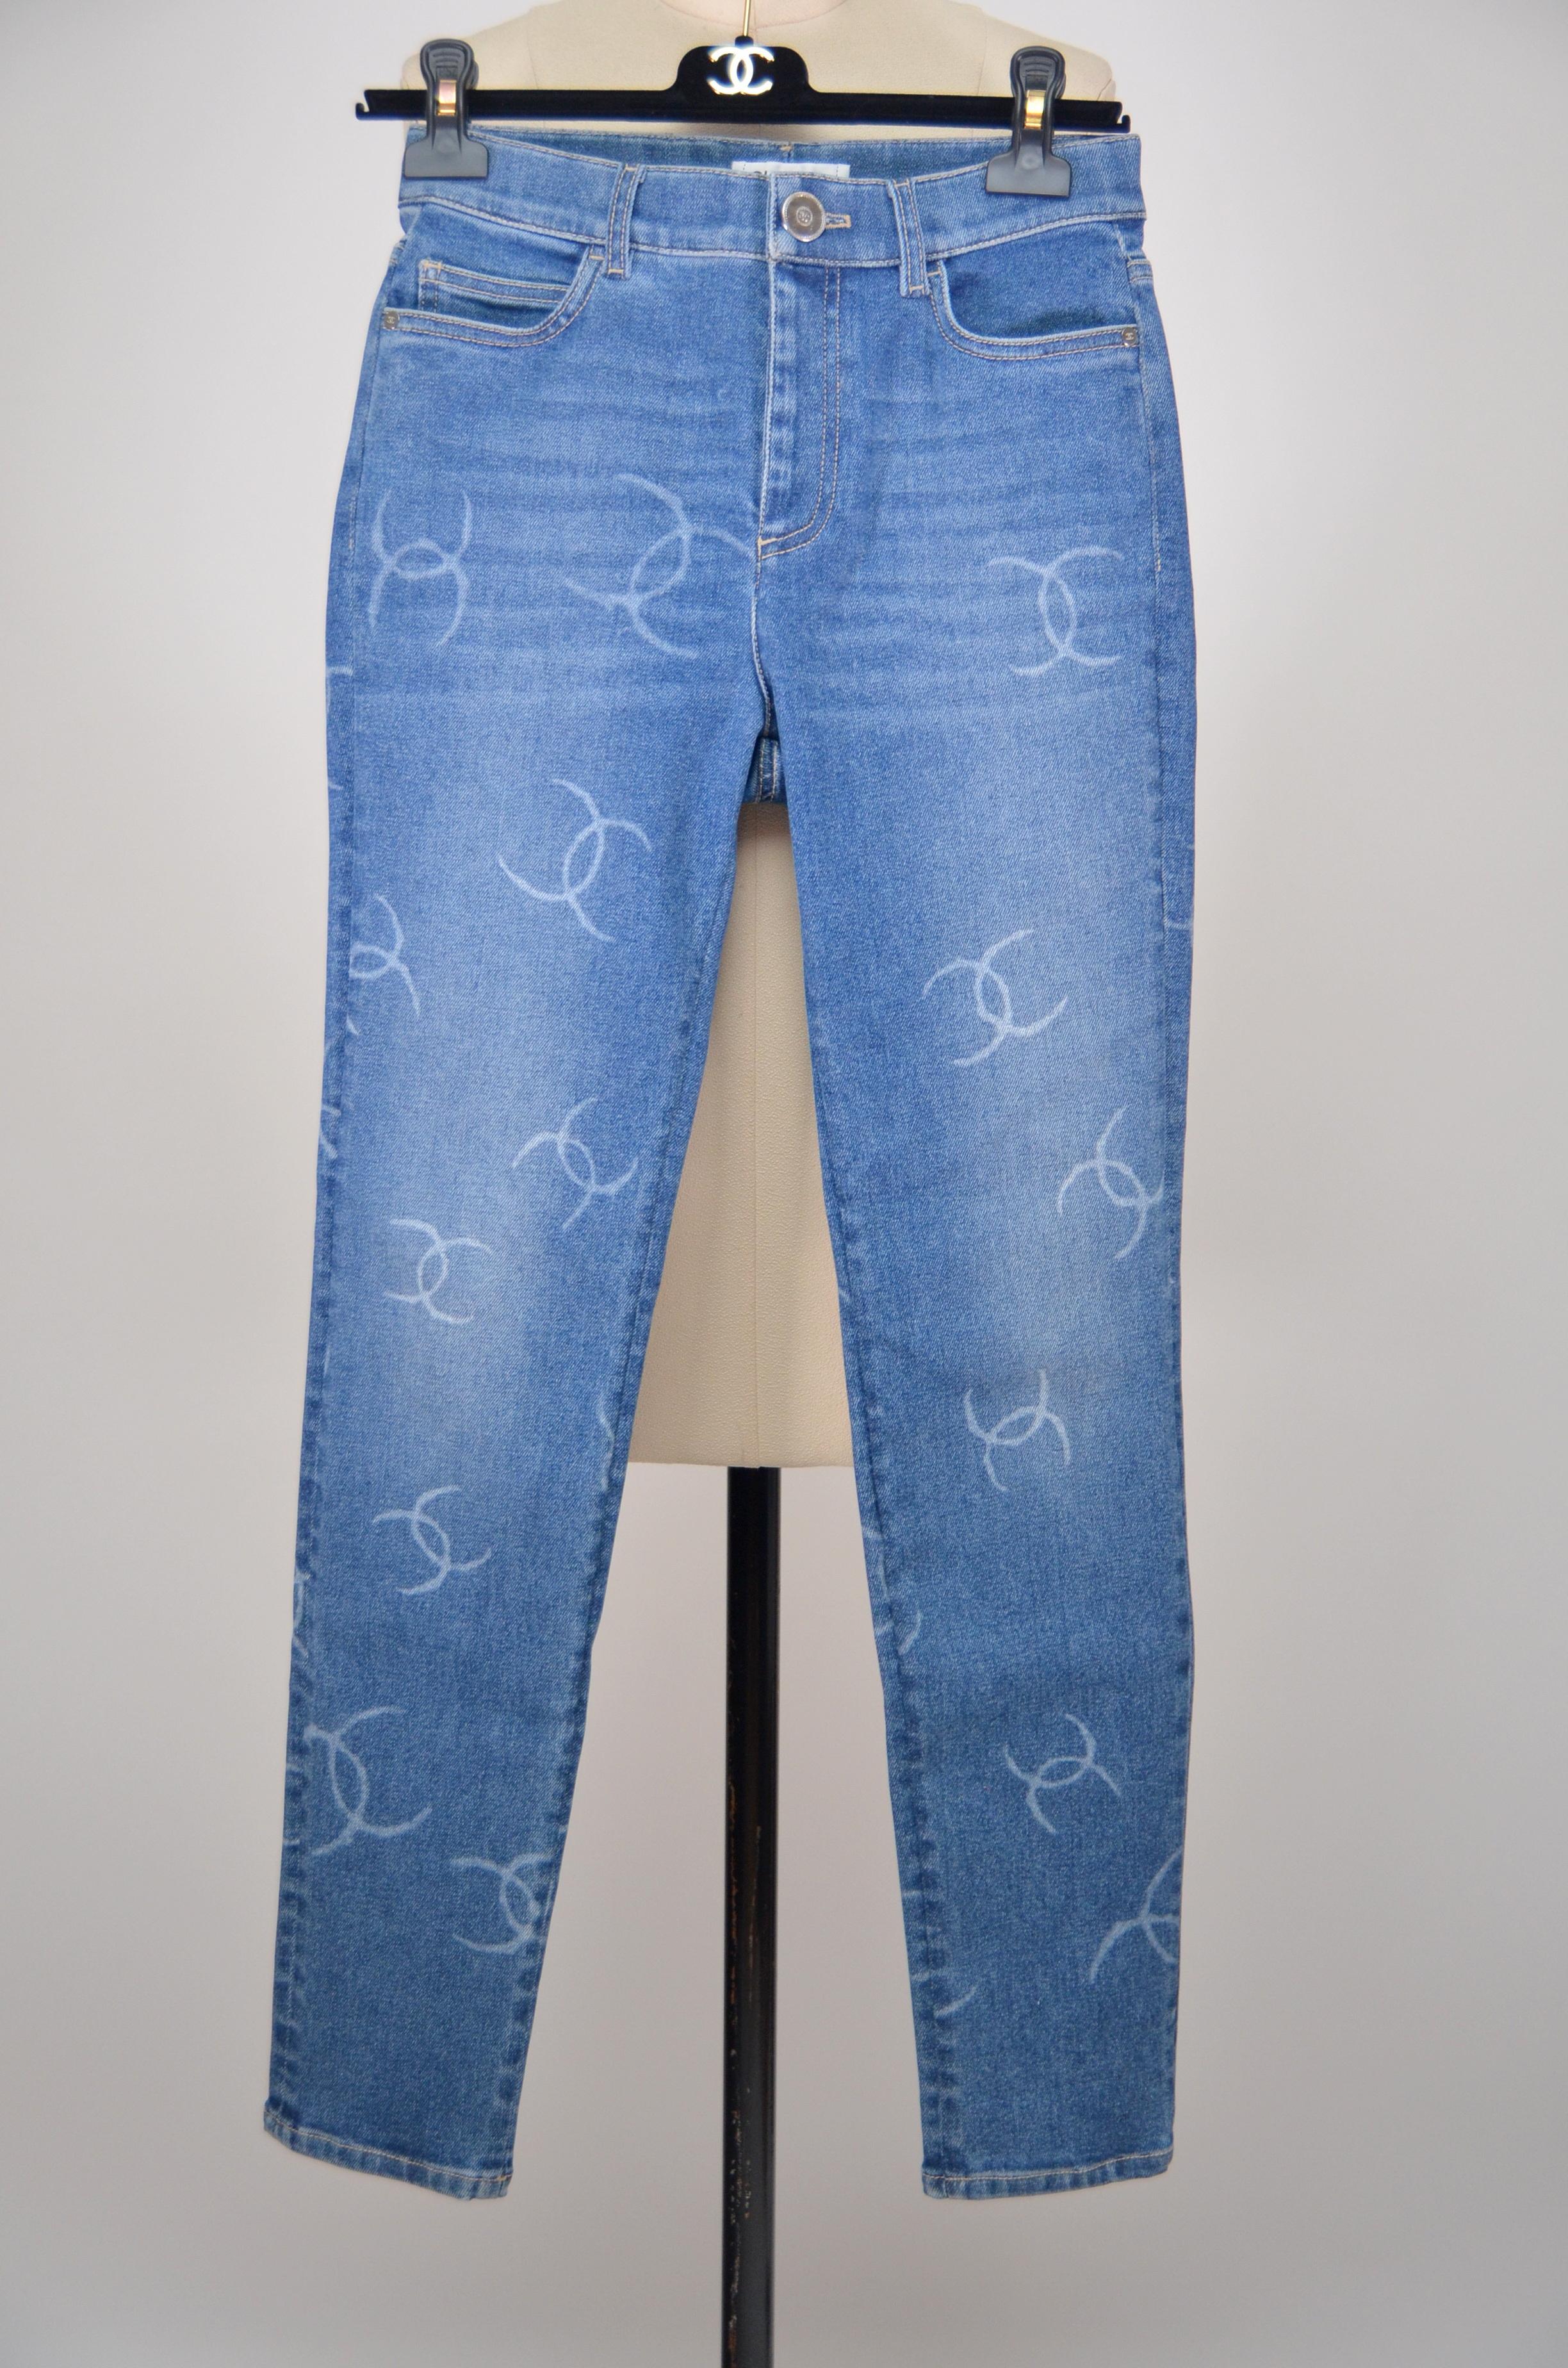 100% authentic guaranteed Chanel denim jeans pants
Brand new with tags
Fabric is little stretchy but they run little small

FINAL SALE.
